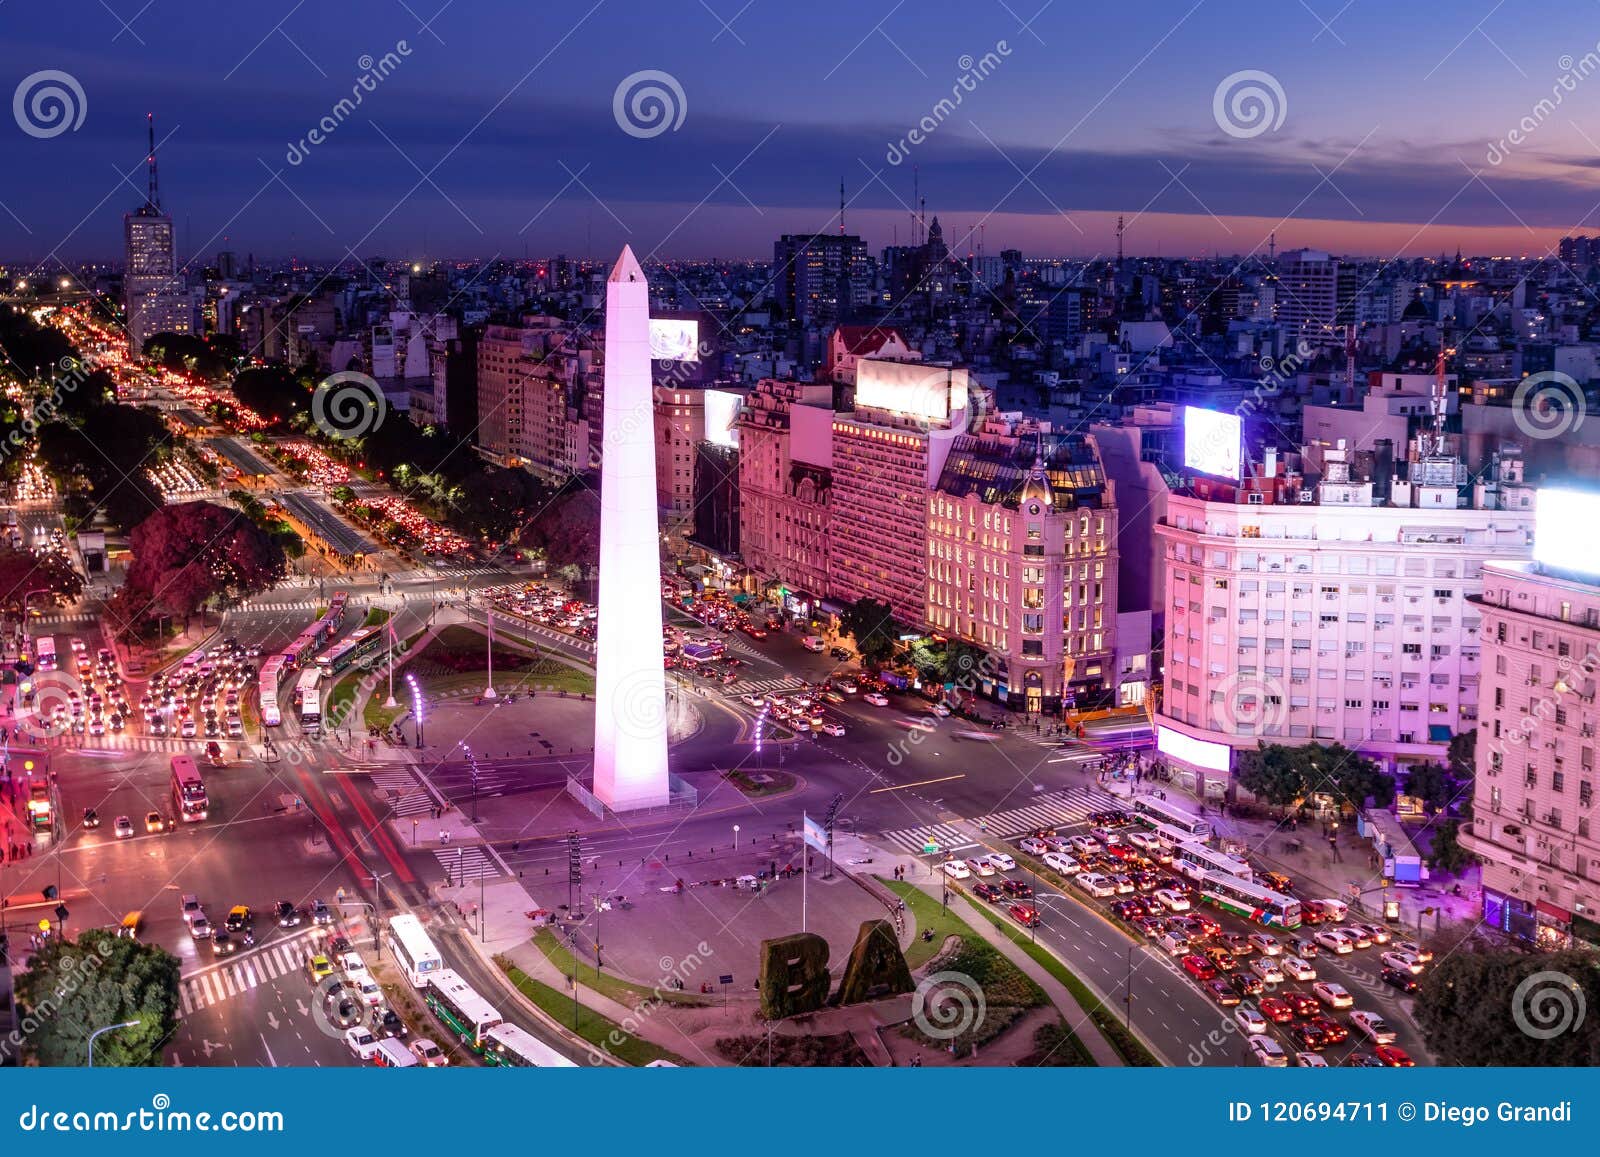 aerial view of buenos aires and 9 de julio avenue at night with purple light - buenos aires, argentina